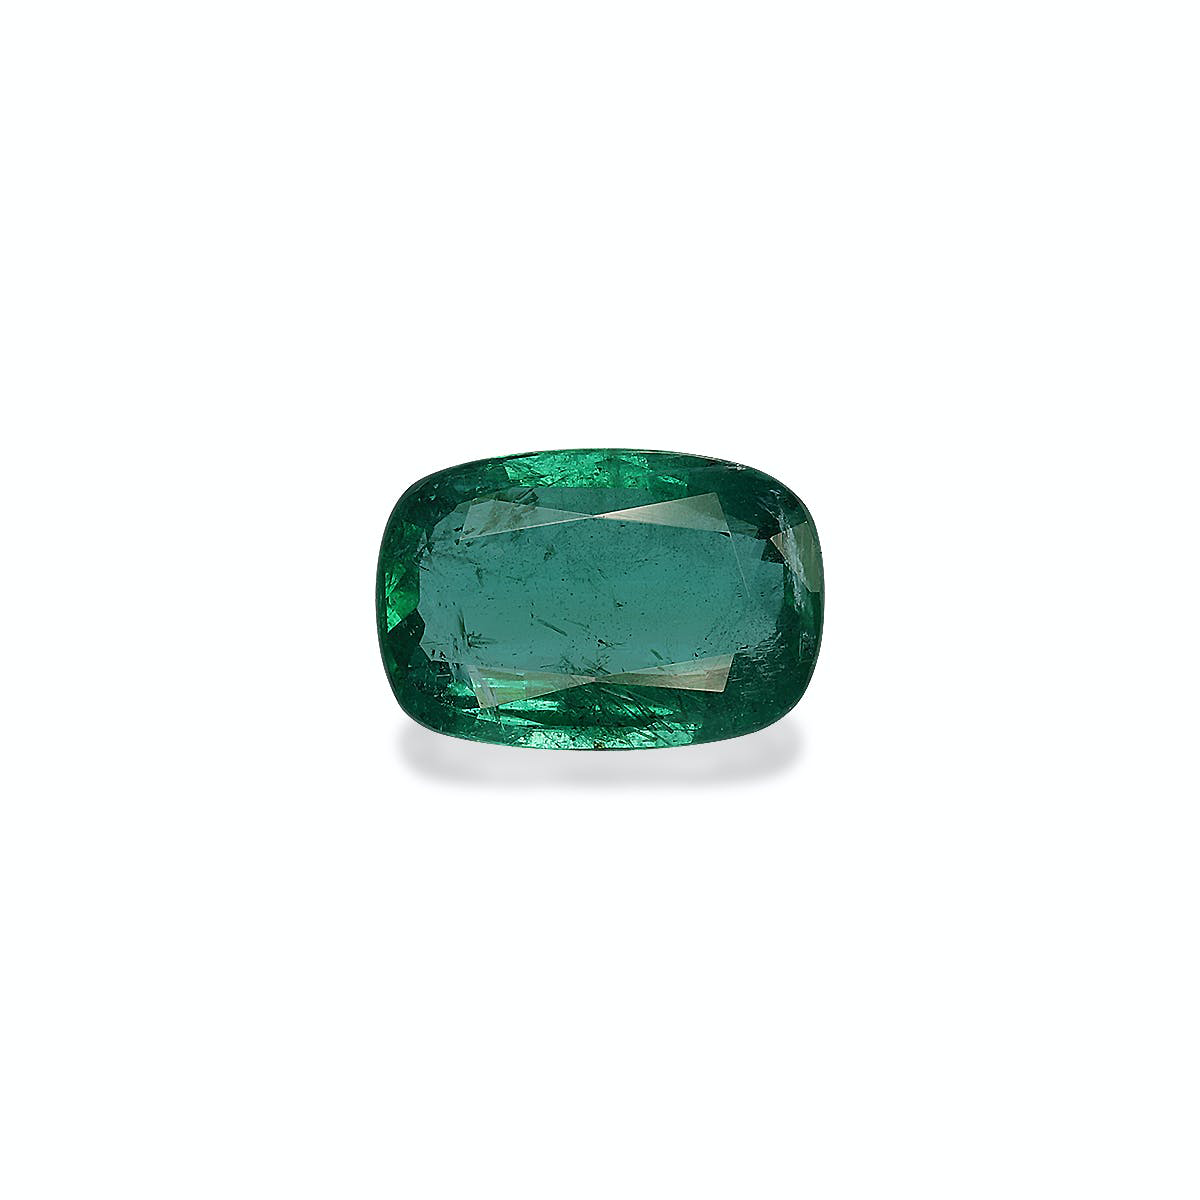 Picture of Green Zambian Emerald 3.43ct (PG0290)